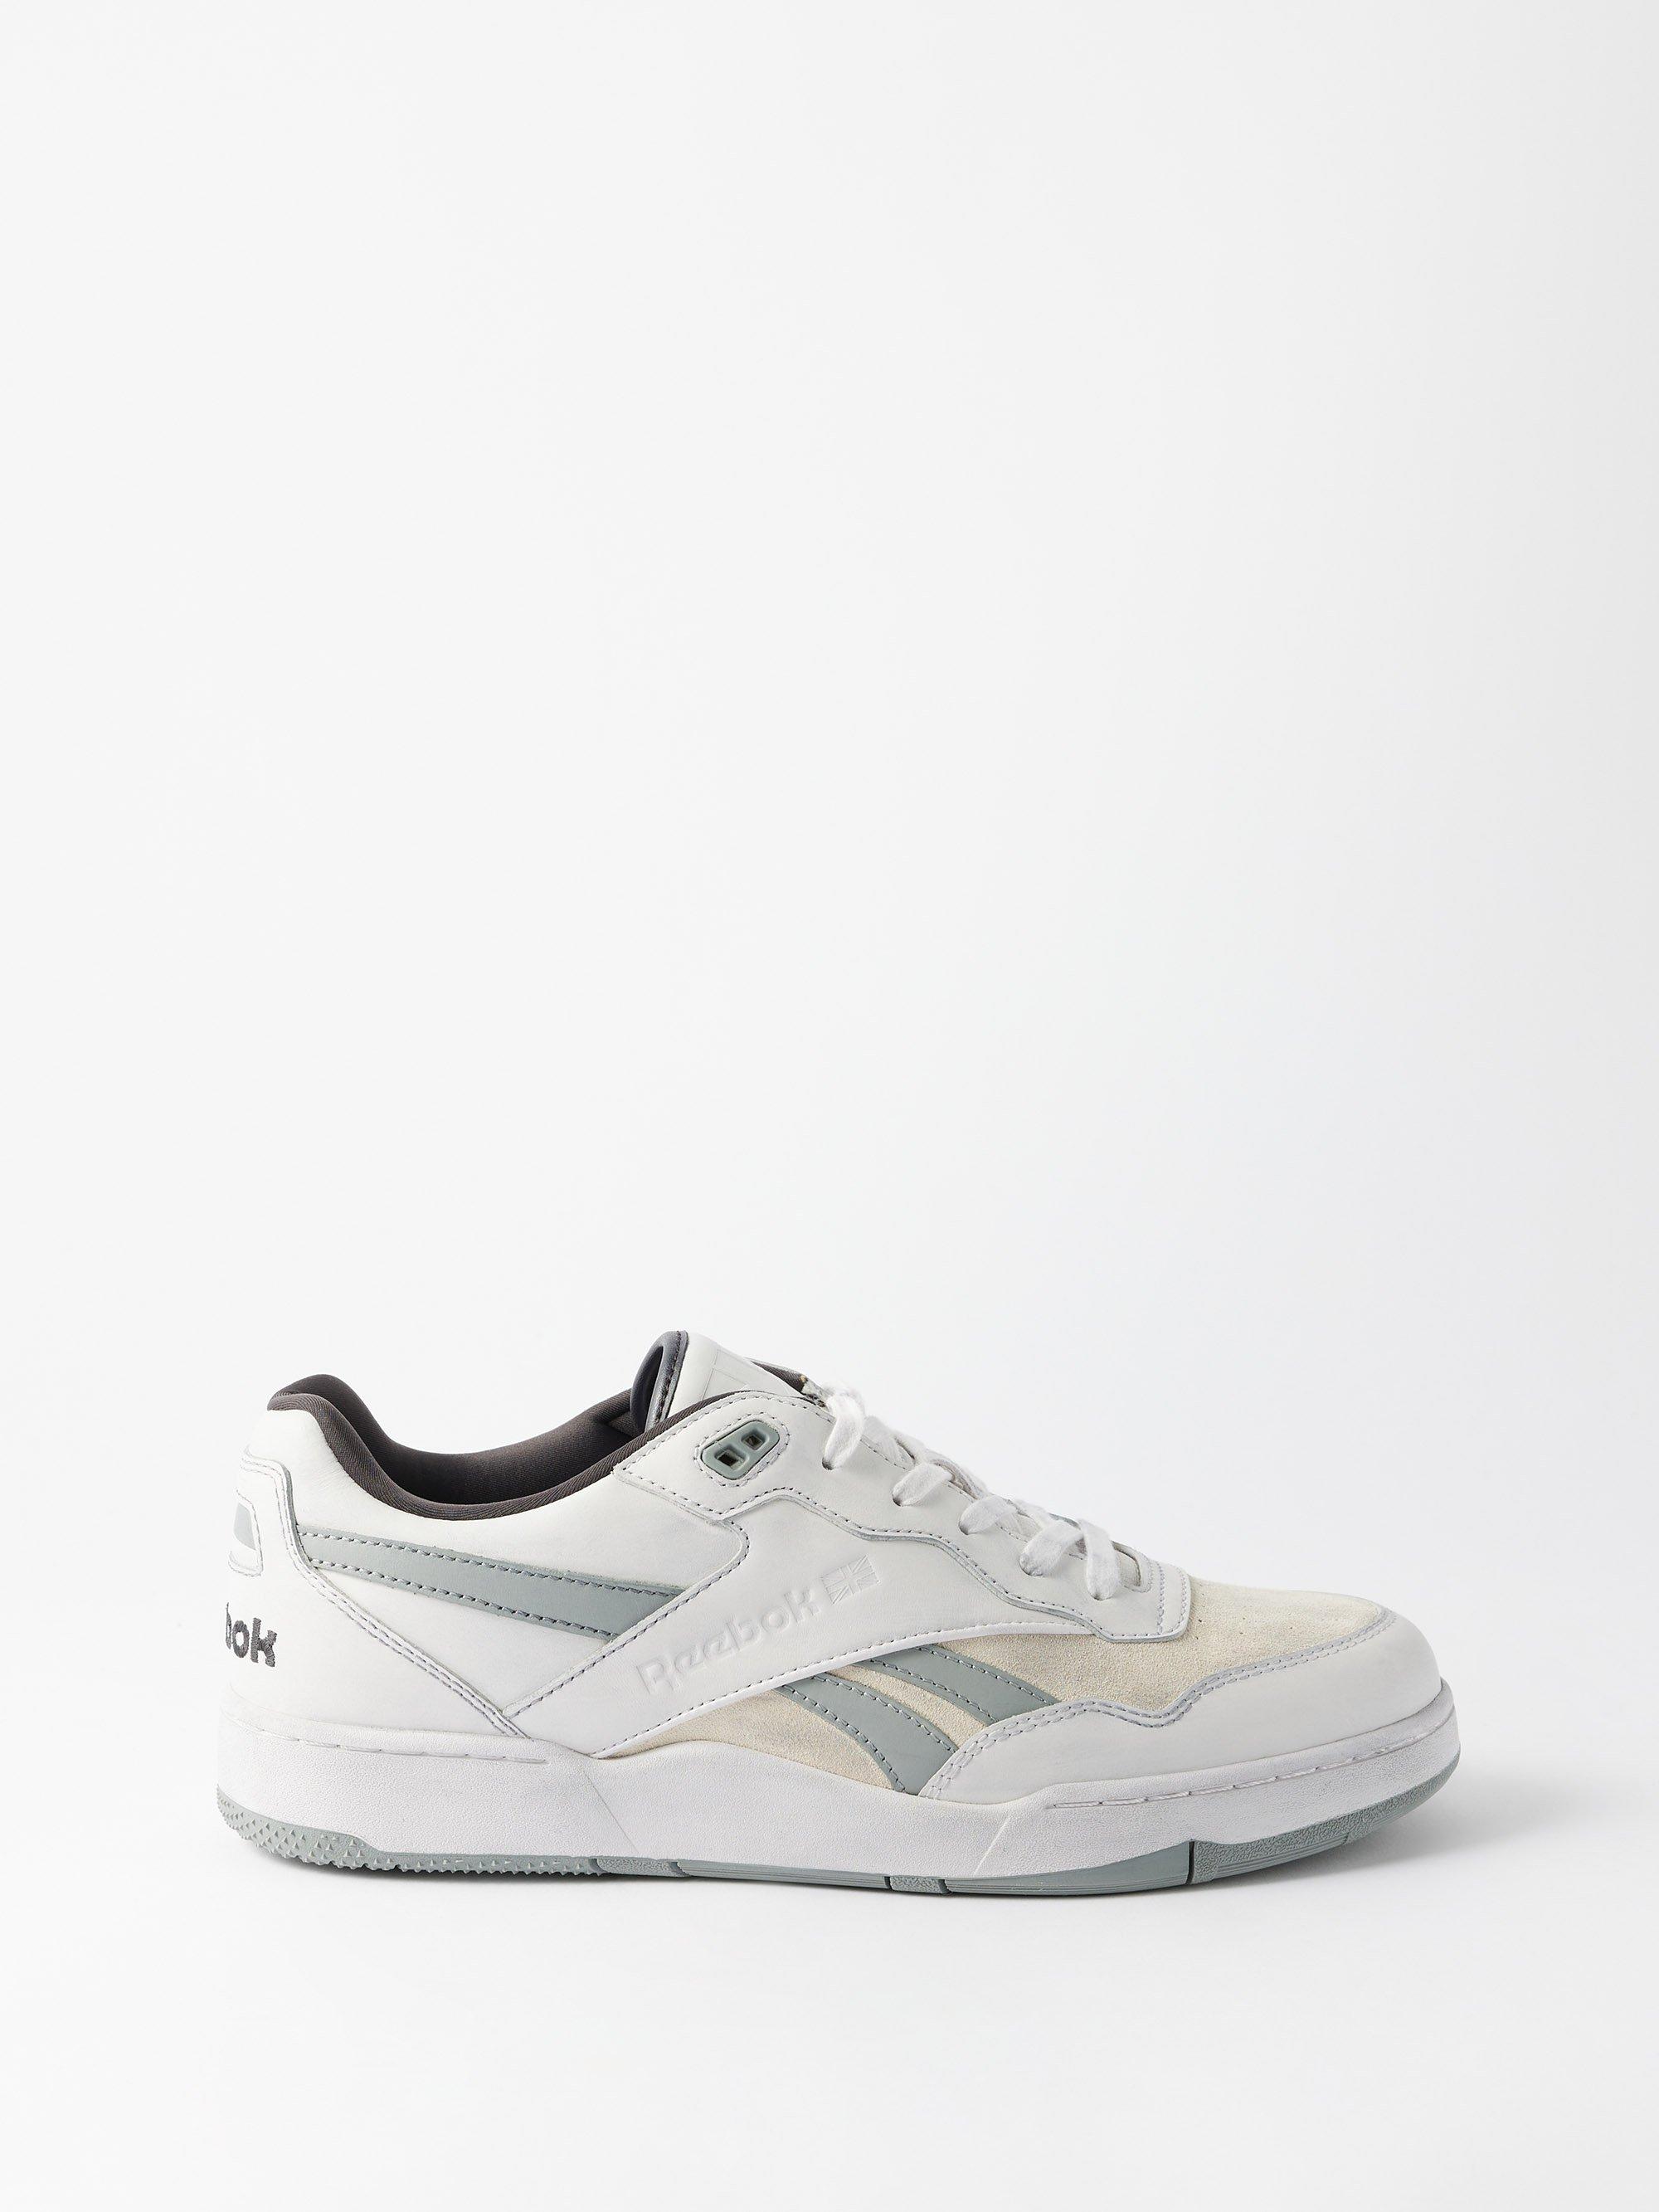 Reebok Bb4000 Distressed Suede And Leather Trainers in White | Lyst